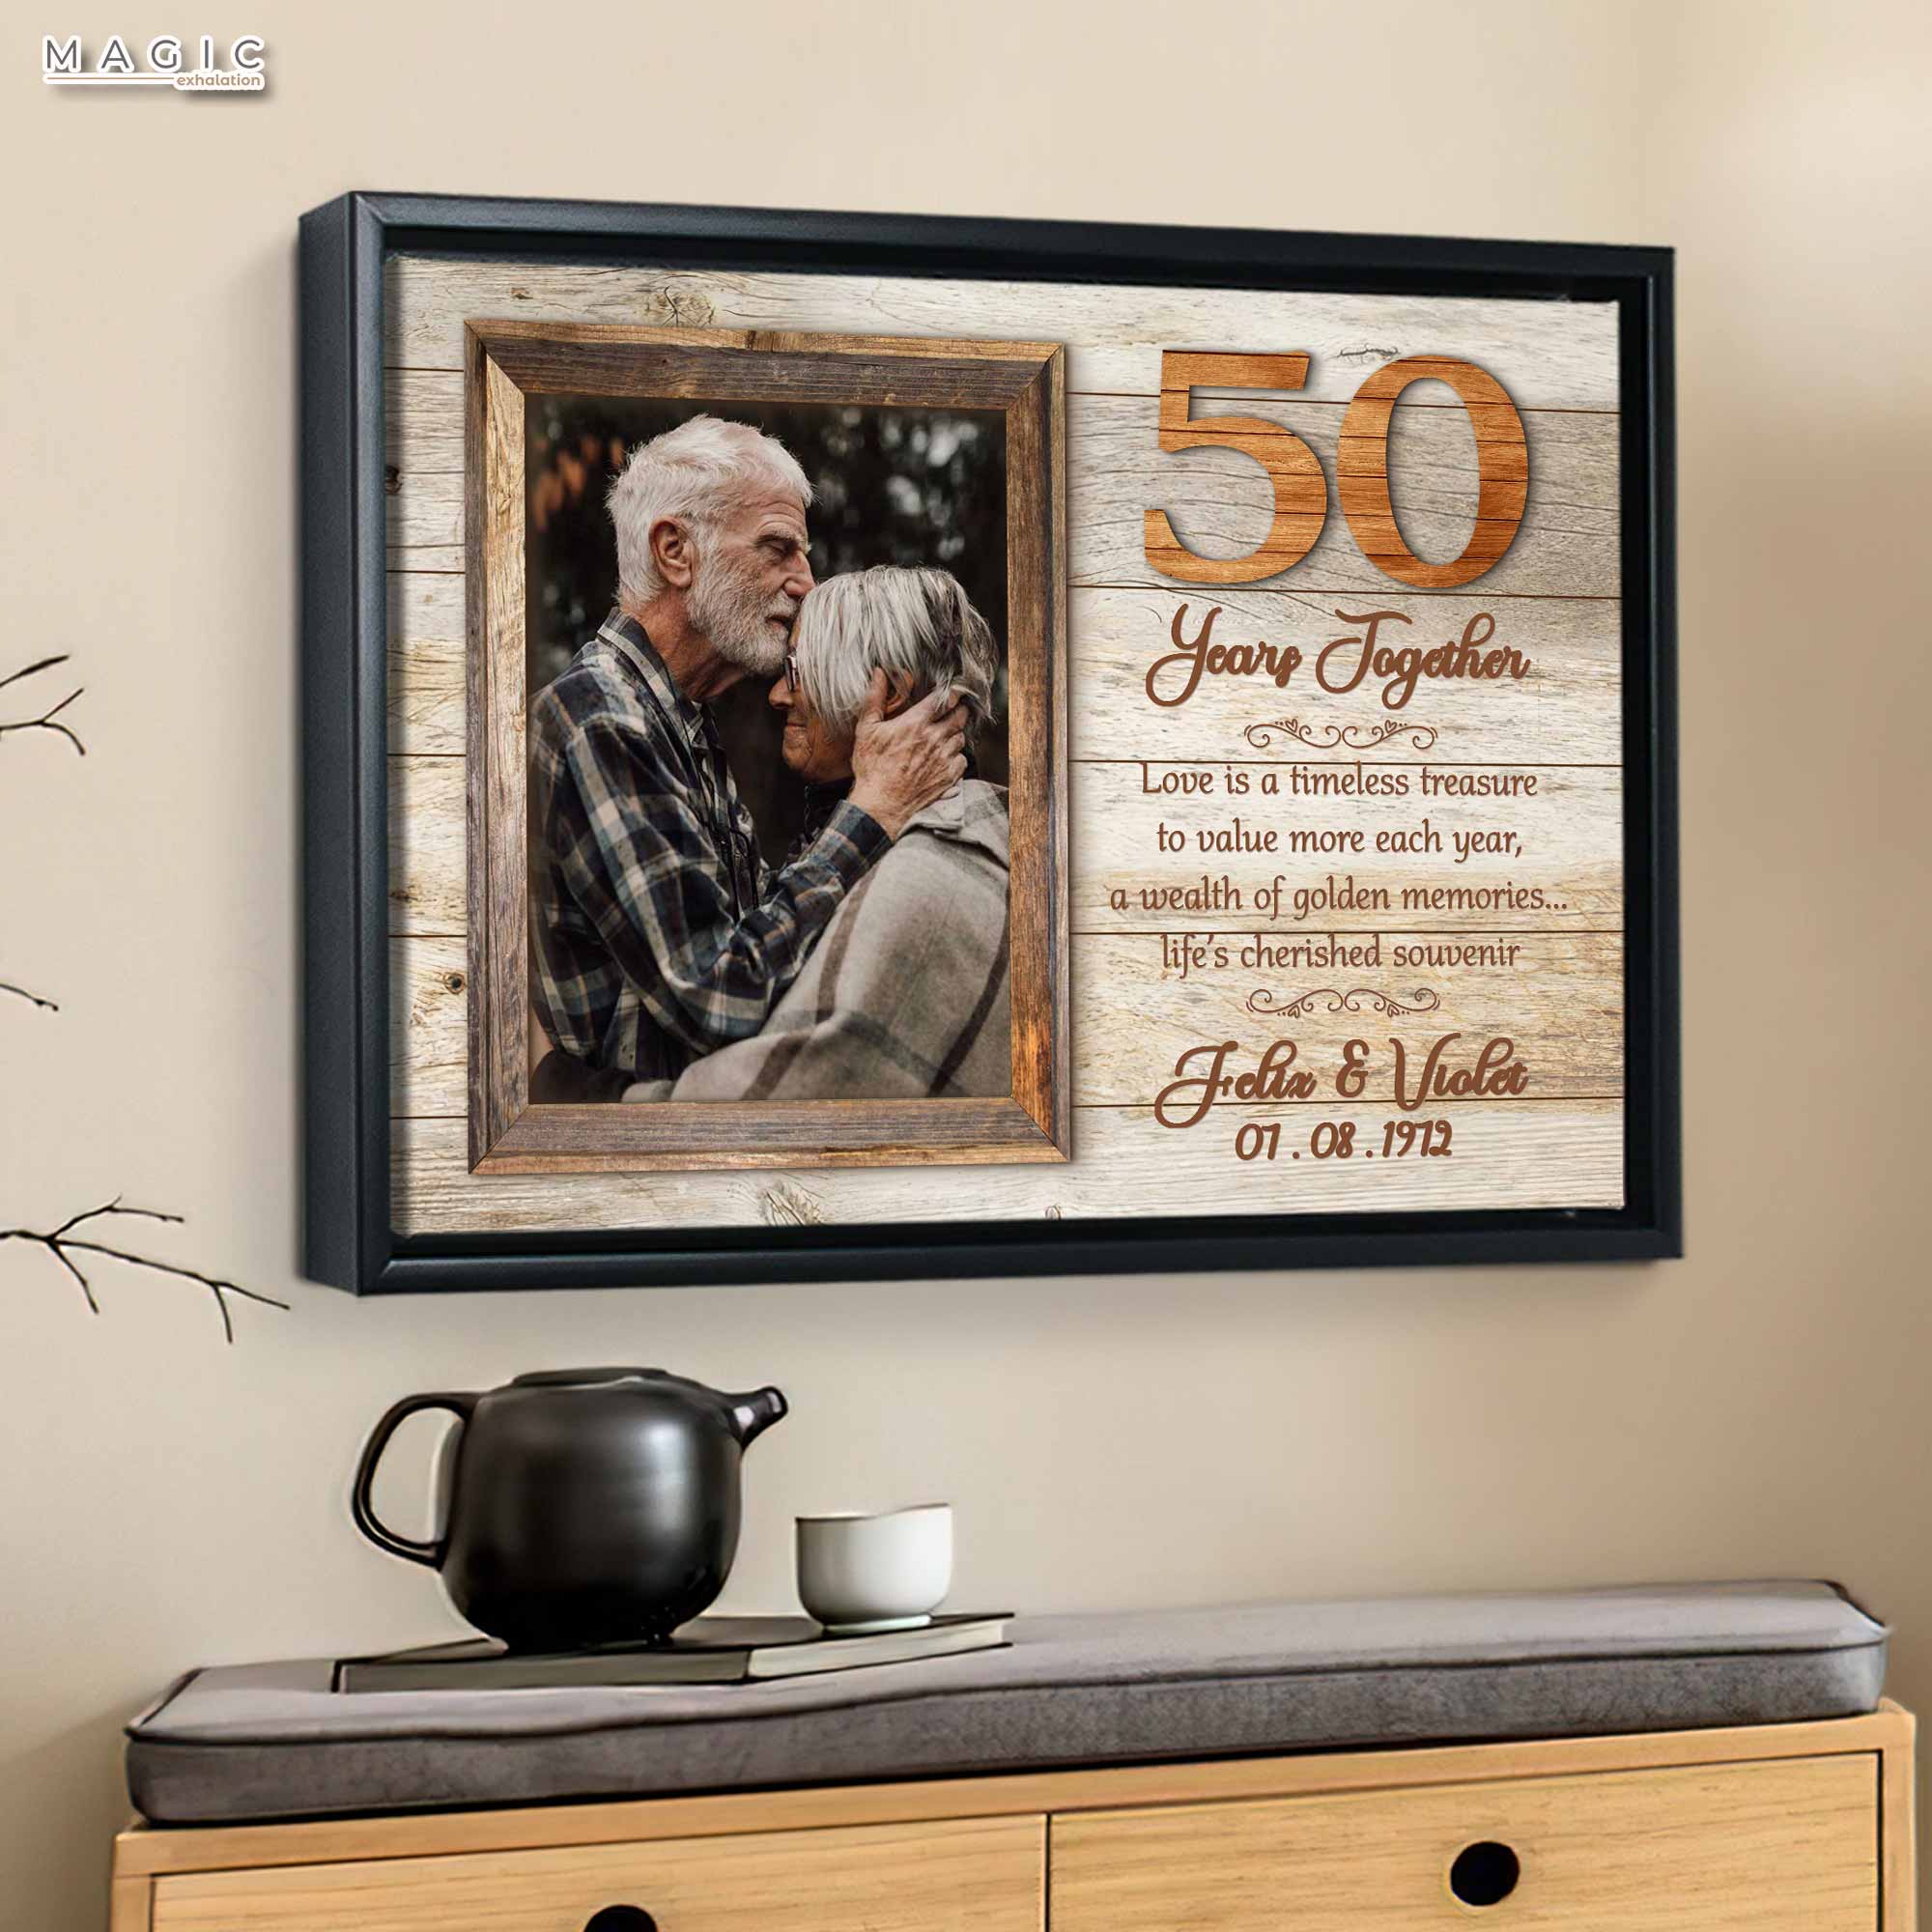 50th wedding anniversary gift ideas, 50th wedding anniversary gift for parents